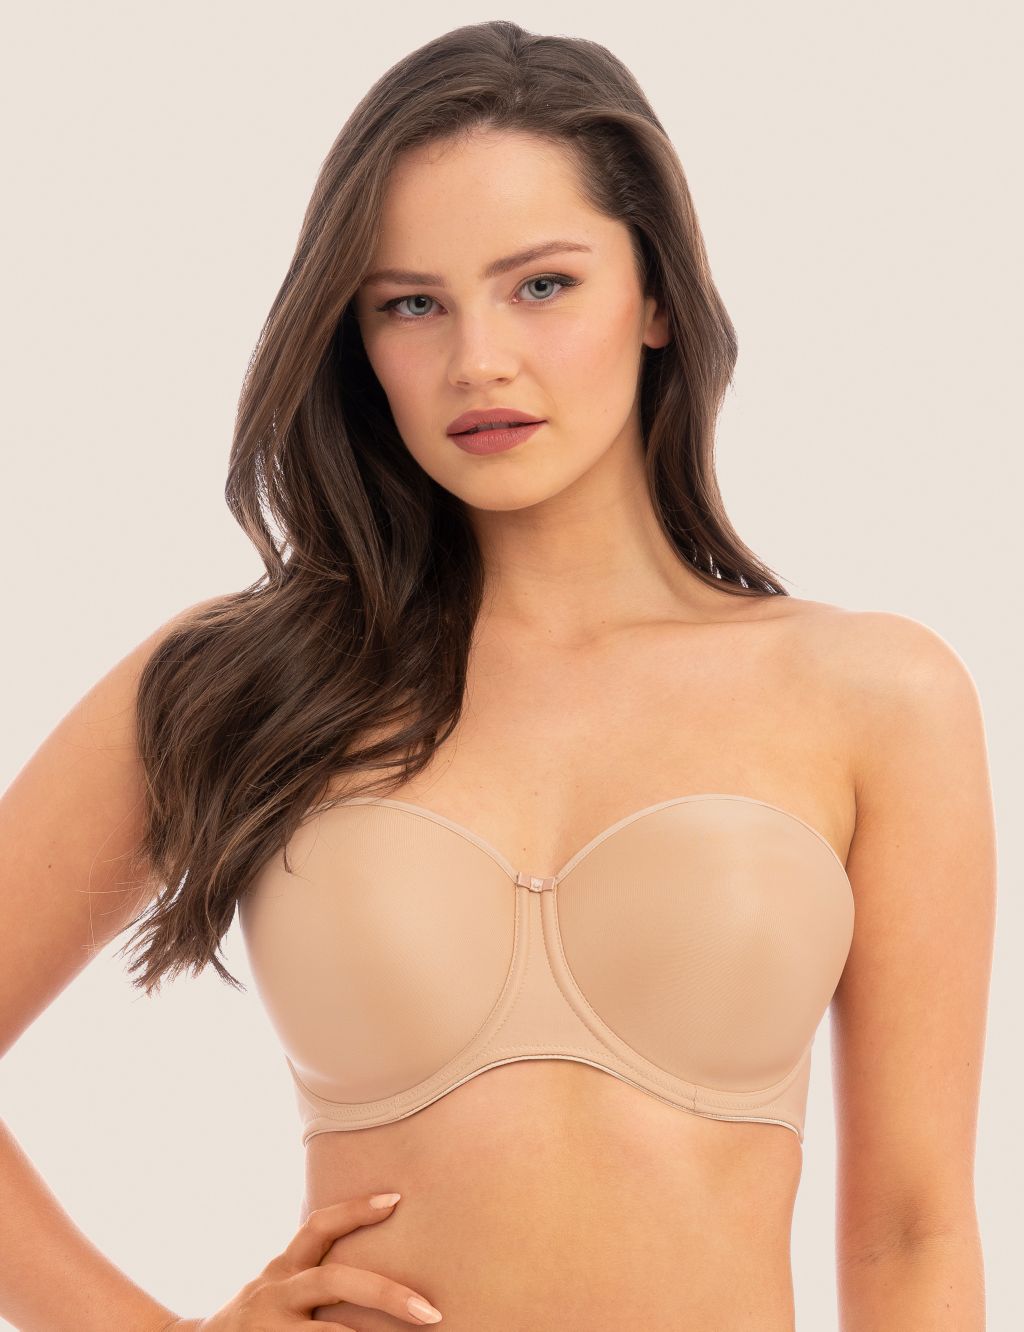 Bride collection Brigitte - Strapless bra with graduated cup